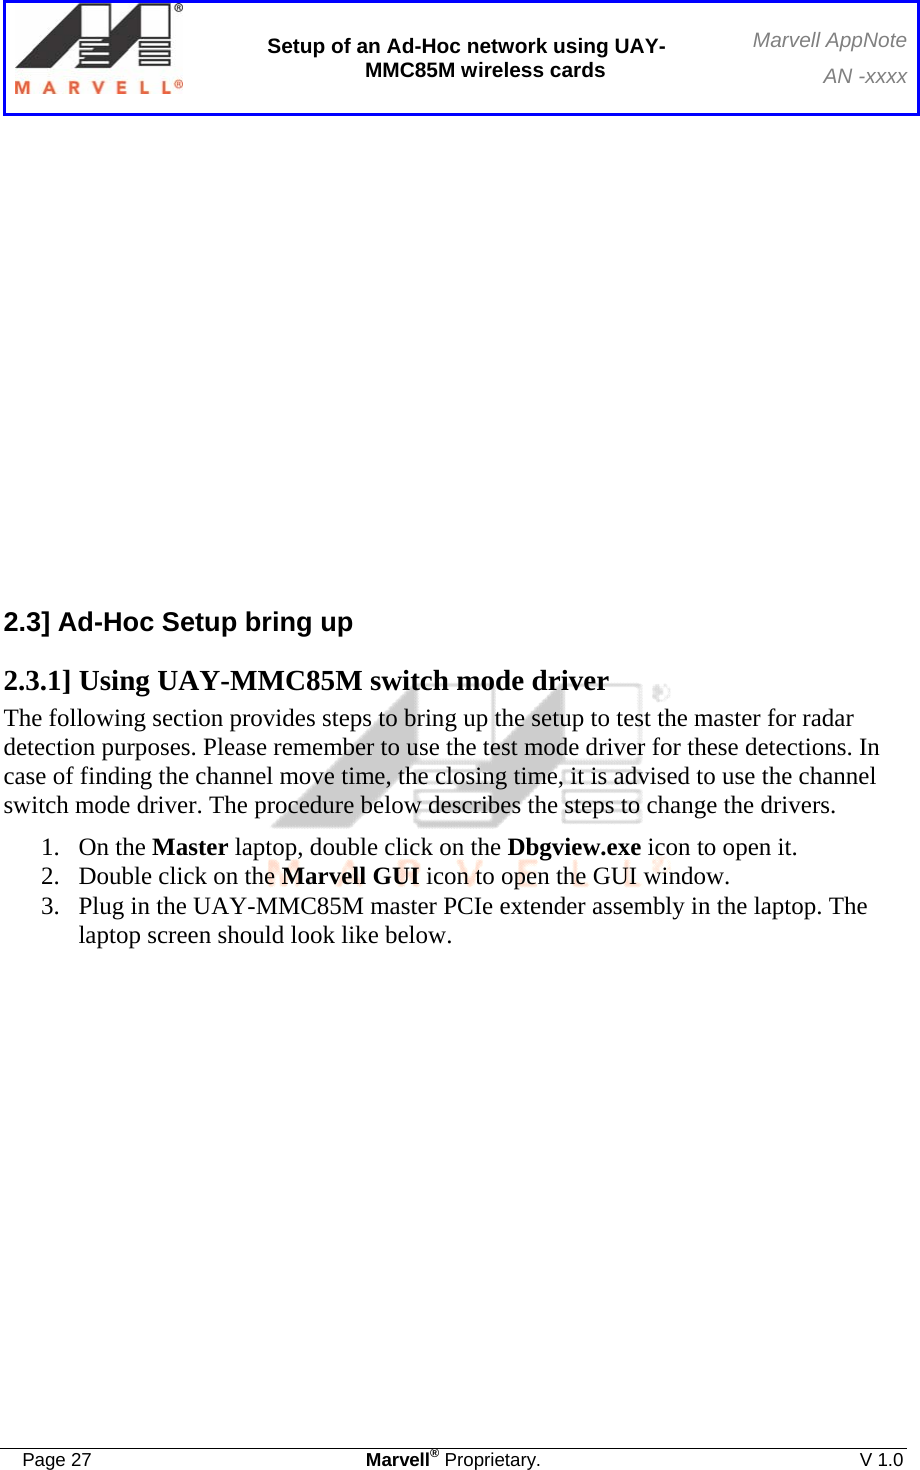  Setup of an Ad-Hoc network using UAY-MMC85M wireless cards Marvell AppNoteAN -xxxx  Page 27  Marvell® Proprietary.  V 1.0                2.3] Ad-Hoc Setup bring up 2.3.1] Using UAY-MMC85M switch mode driver The following section provides steps to bring up the setup to test the master for radar detection purposes. Please remember to use the test mode driver for these detections. In case of finding the channel move time, the closing time, it is advised to use the channel switch mode driver. The procedure below describes the steps to change the drivers. 1. On the Master laptop, double click on the Dbgview.exe icon to open it. 2. Double click on the Marvell GUI icon to open the GUI window.  3. Plug in the UAY-MMC85M master PCIe extender assembly in the laptop. The laptop screen should look like below.   